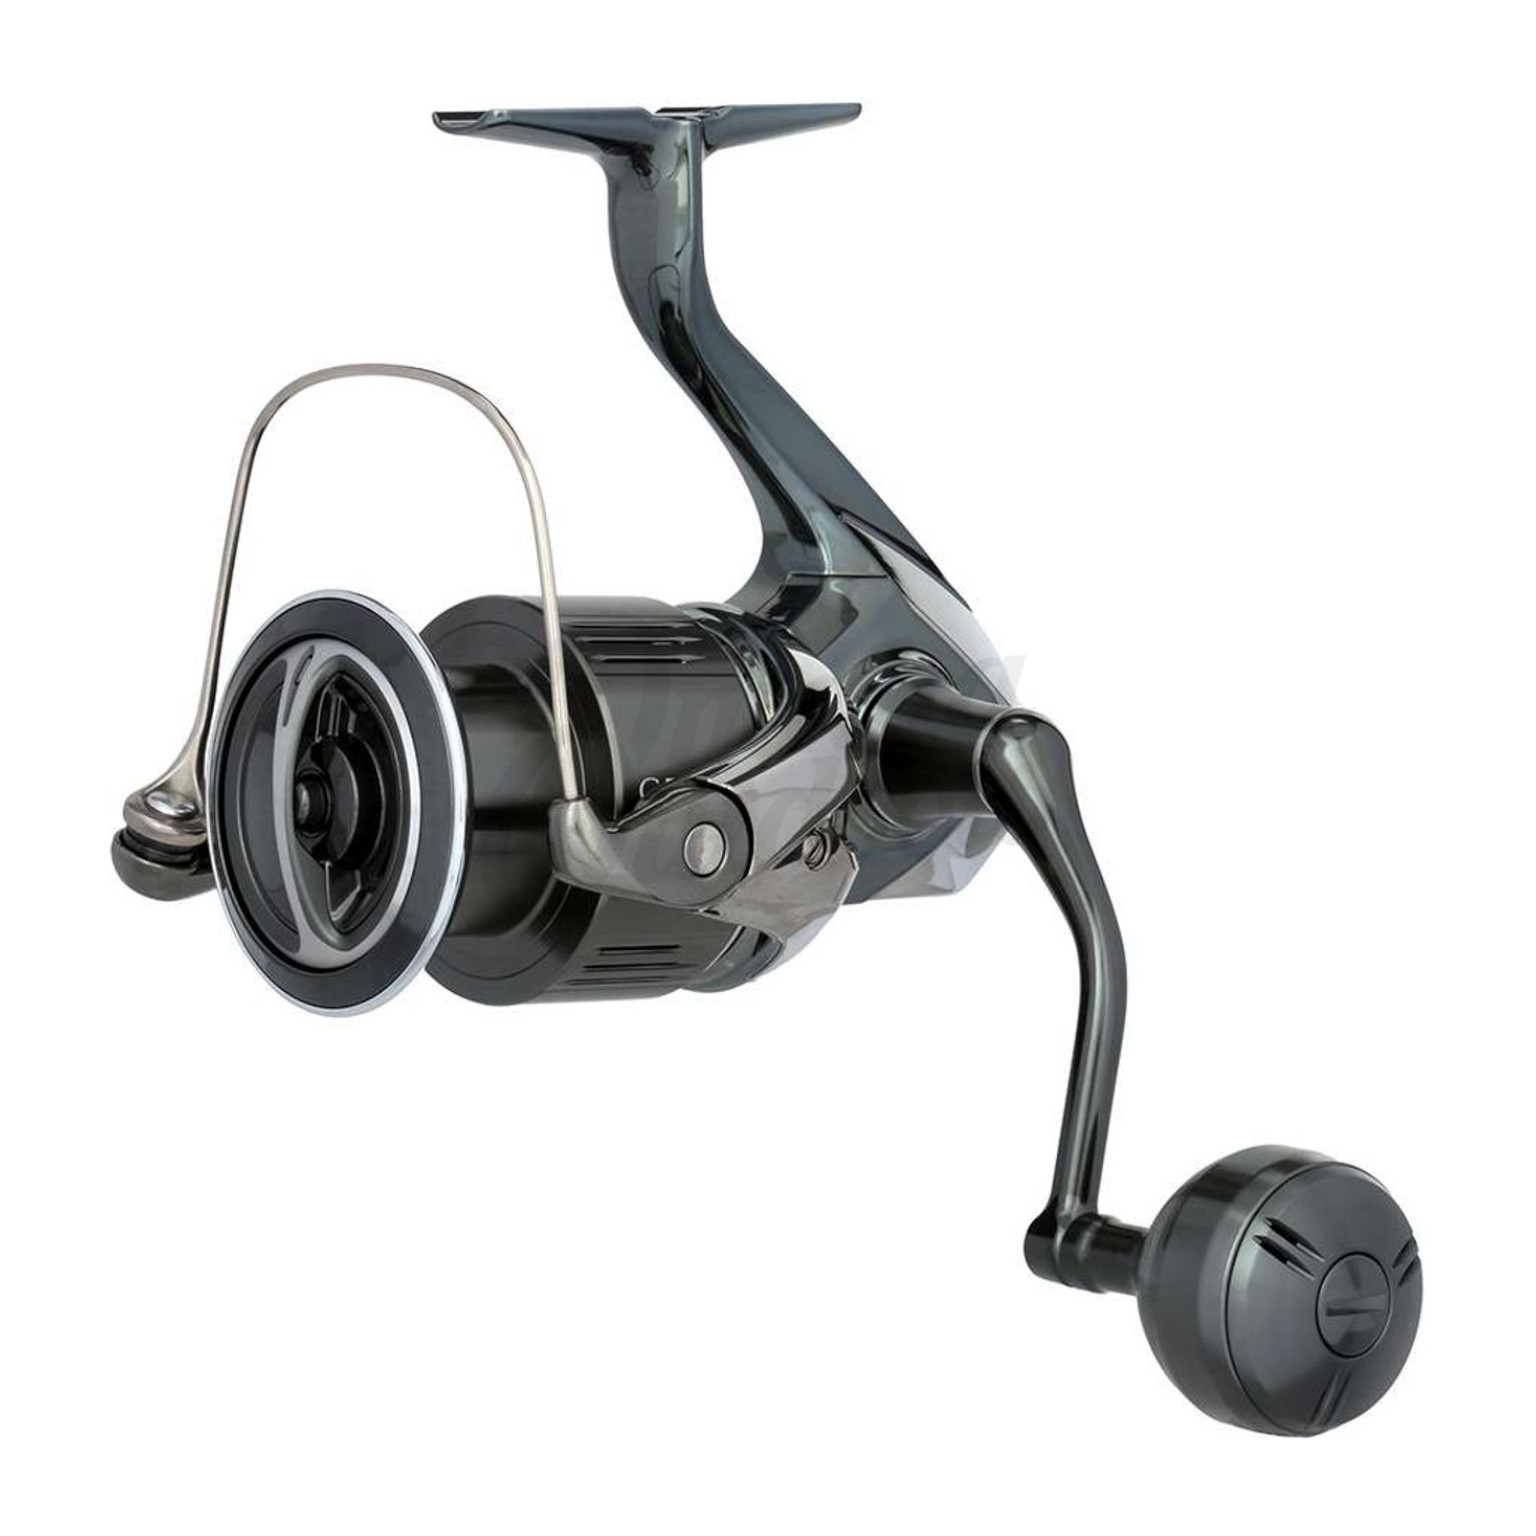 Hey Skipper Fishing - CHOOSE YOUR PLAYER: Stella 5000 spinning reel or  Akios 666 conventional reel? They both have their perks and disadvantages…  there's a LOT of conversation around conventional reels on